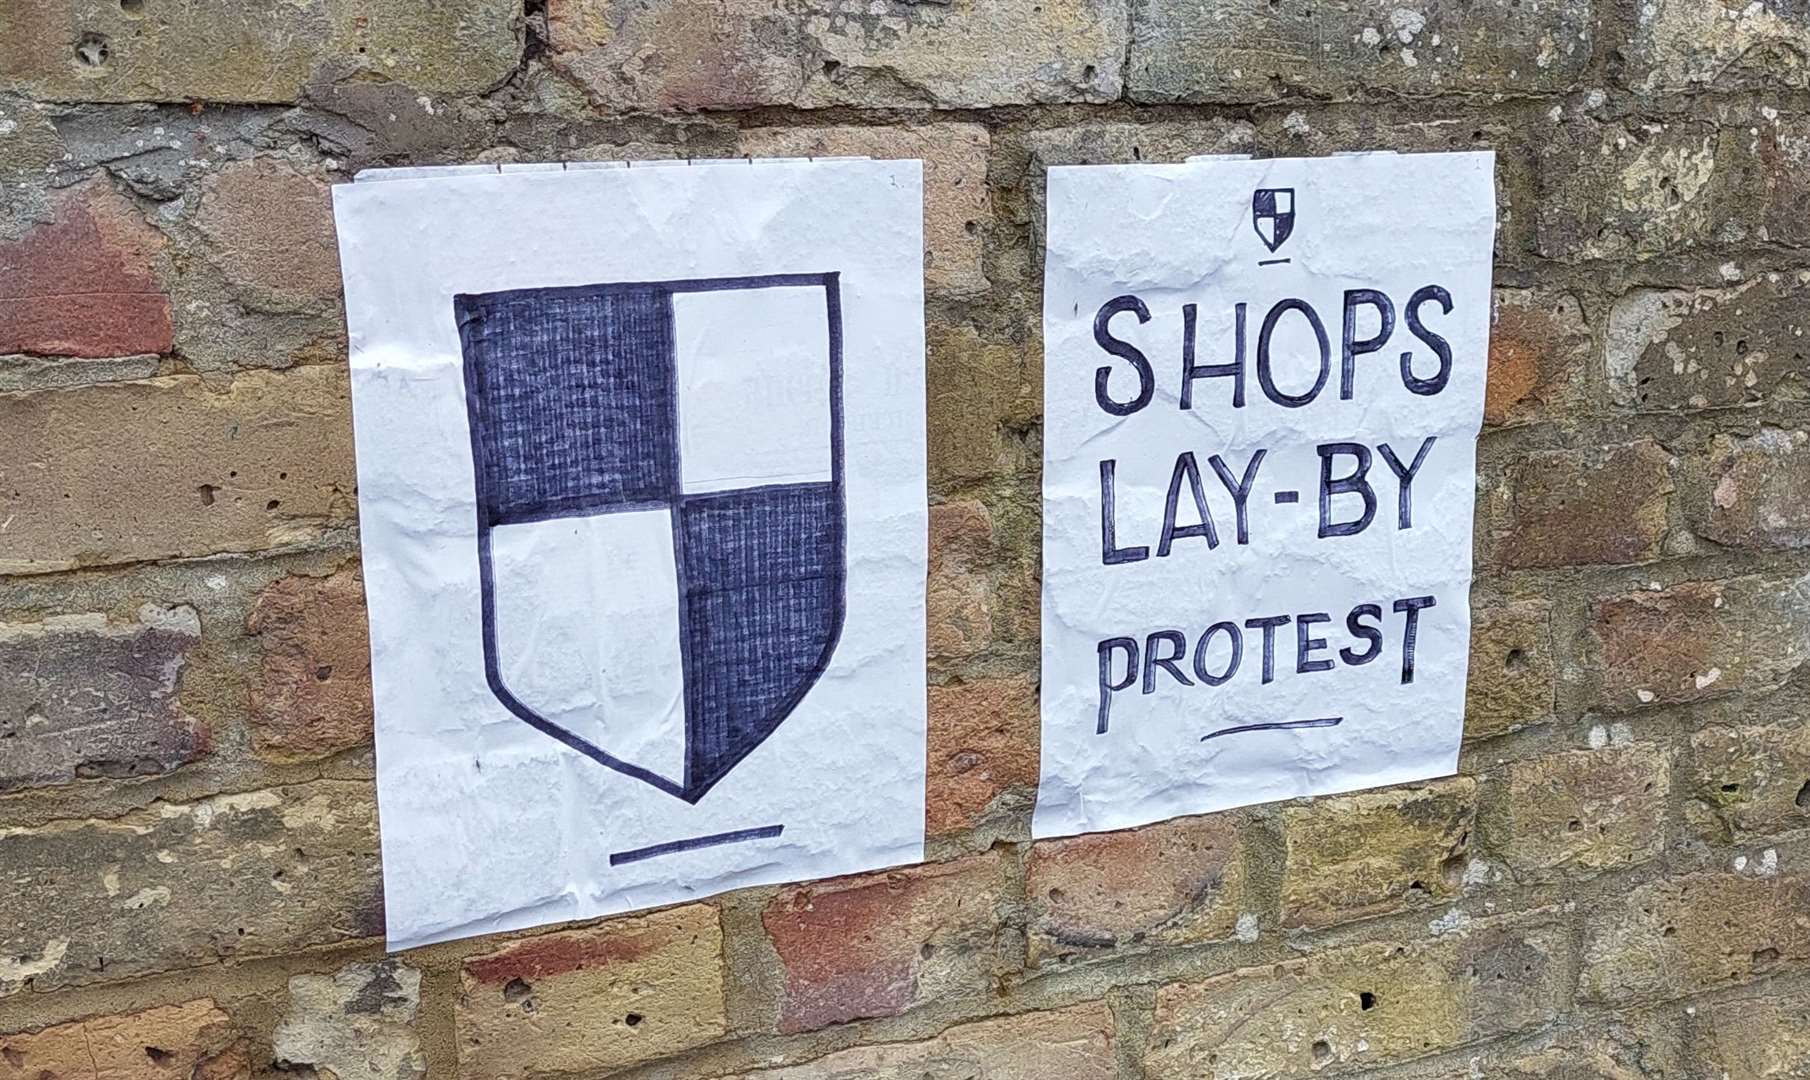 Posters in protest appeared from an unknown source